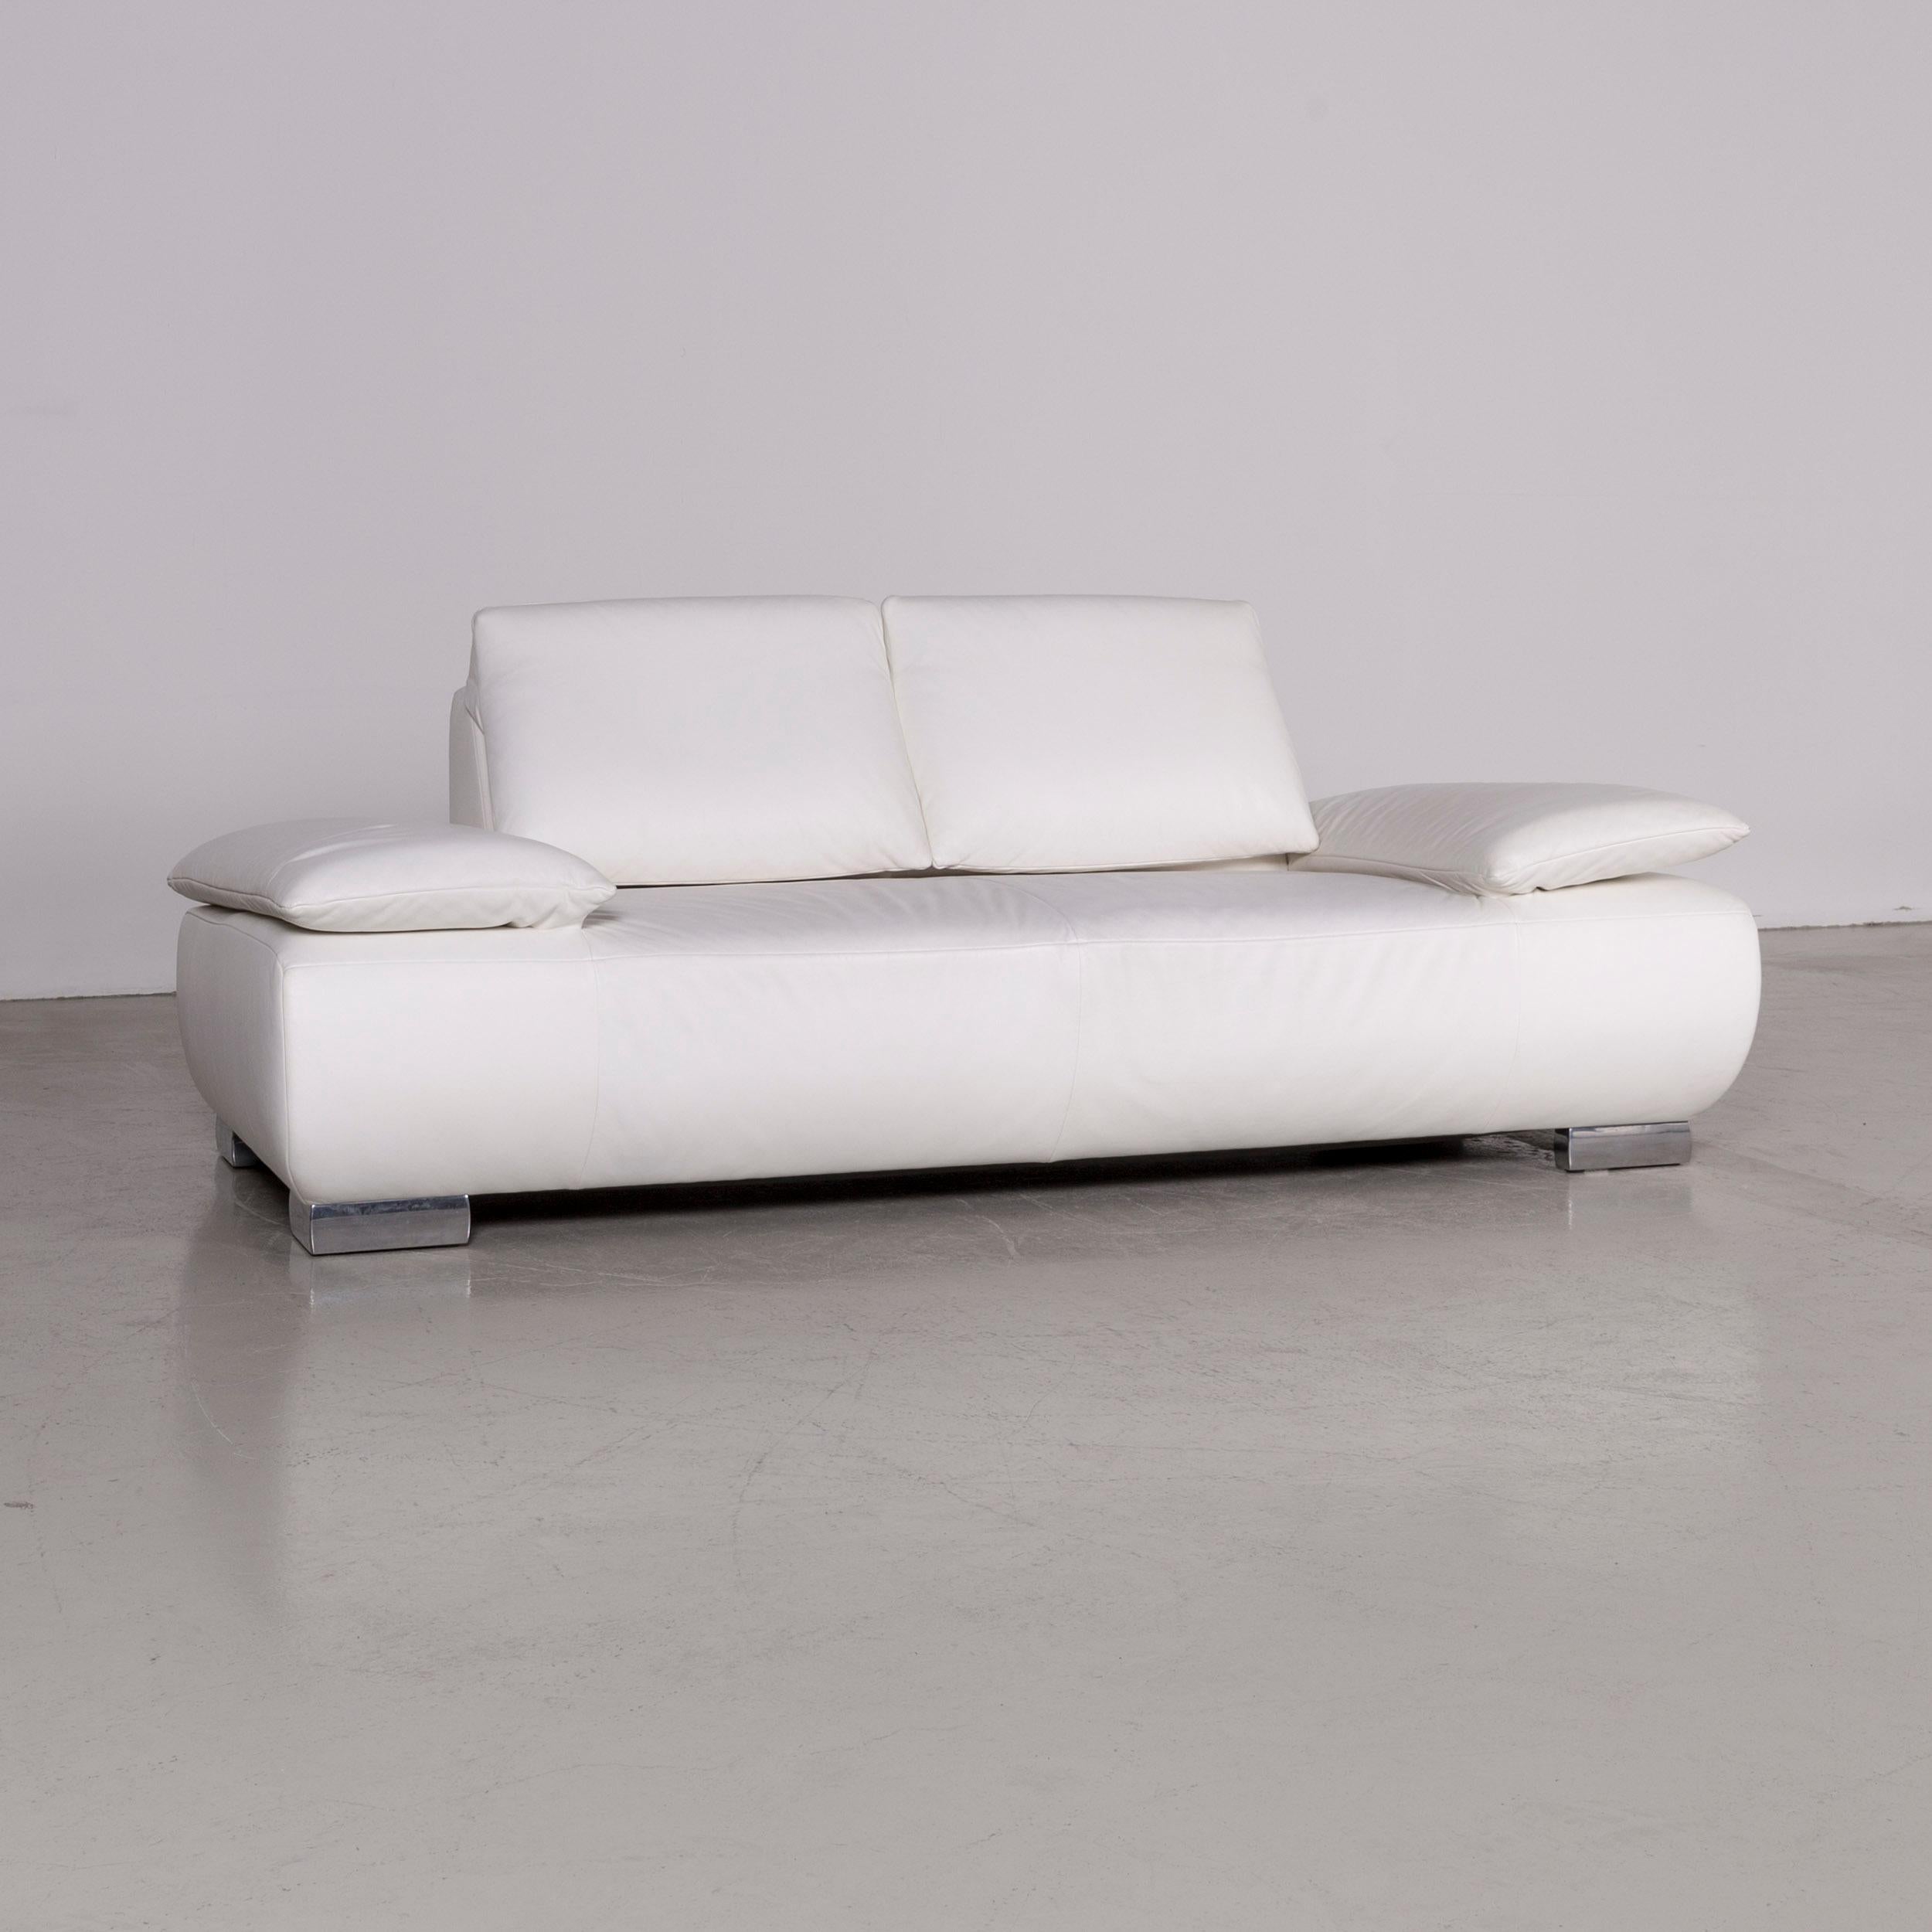 German Koinor Volare Designer Leather Sofa White Two-Seat Couch For Sale